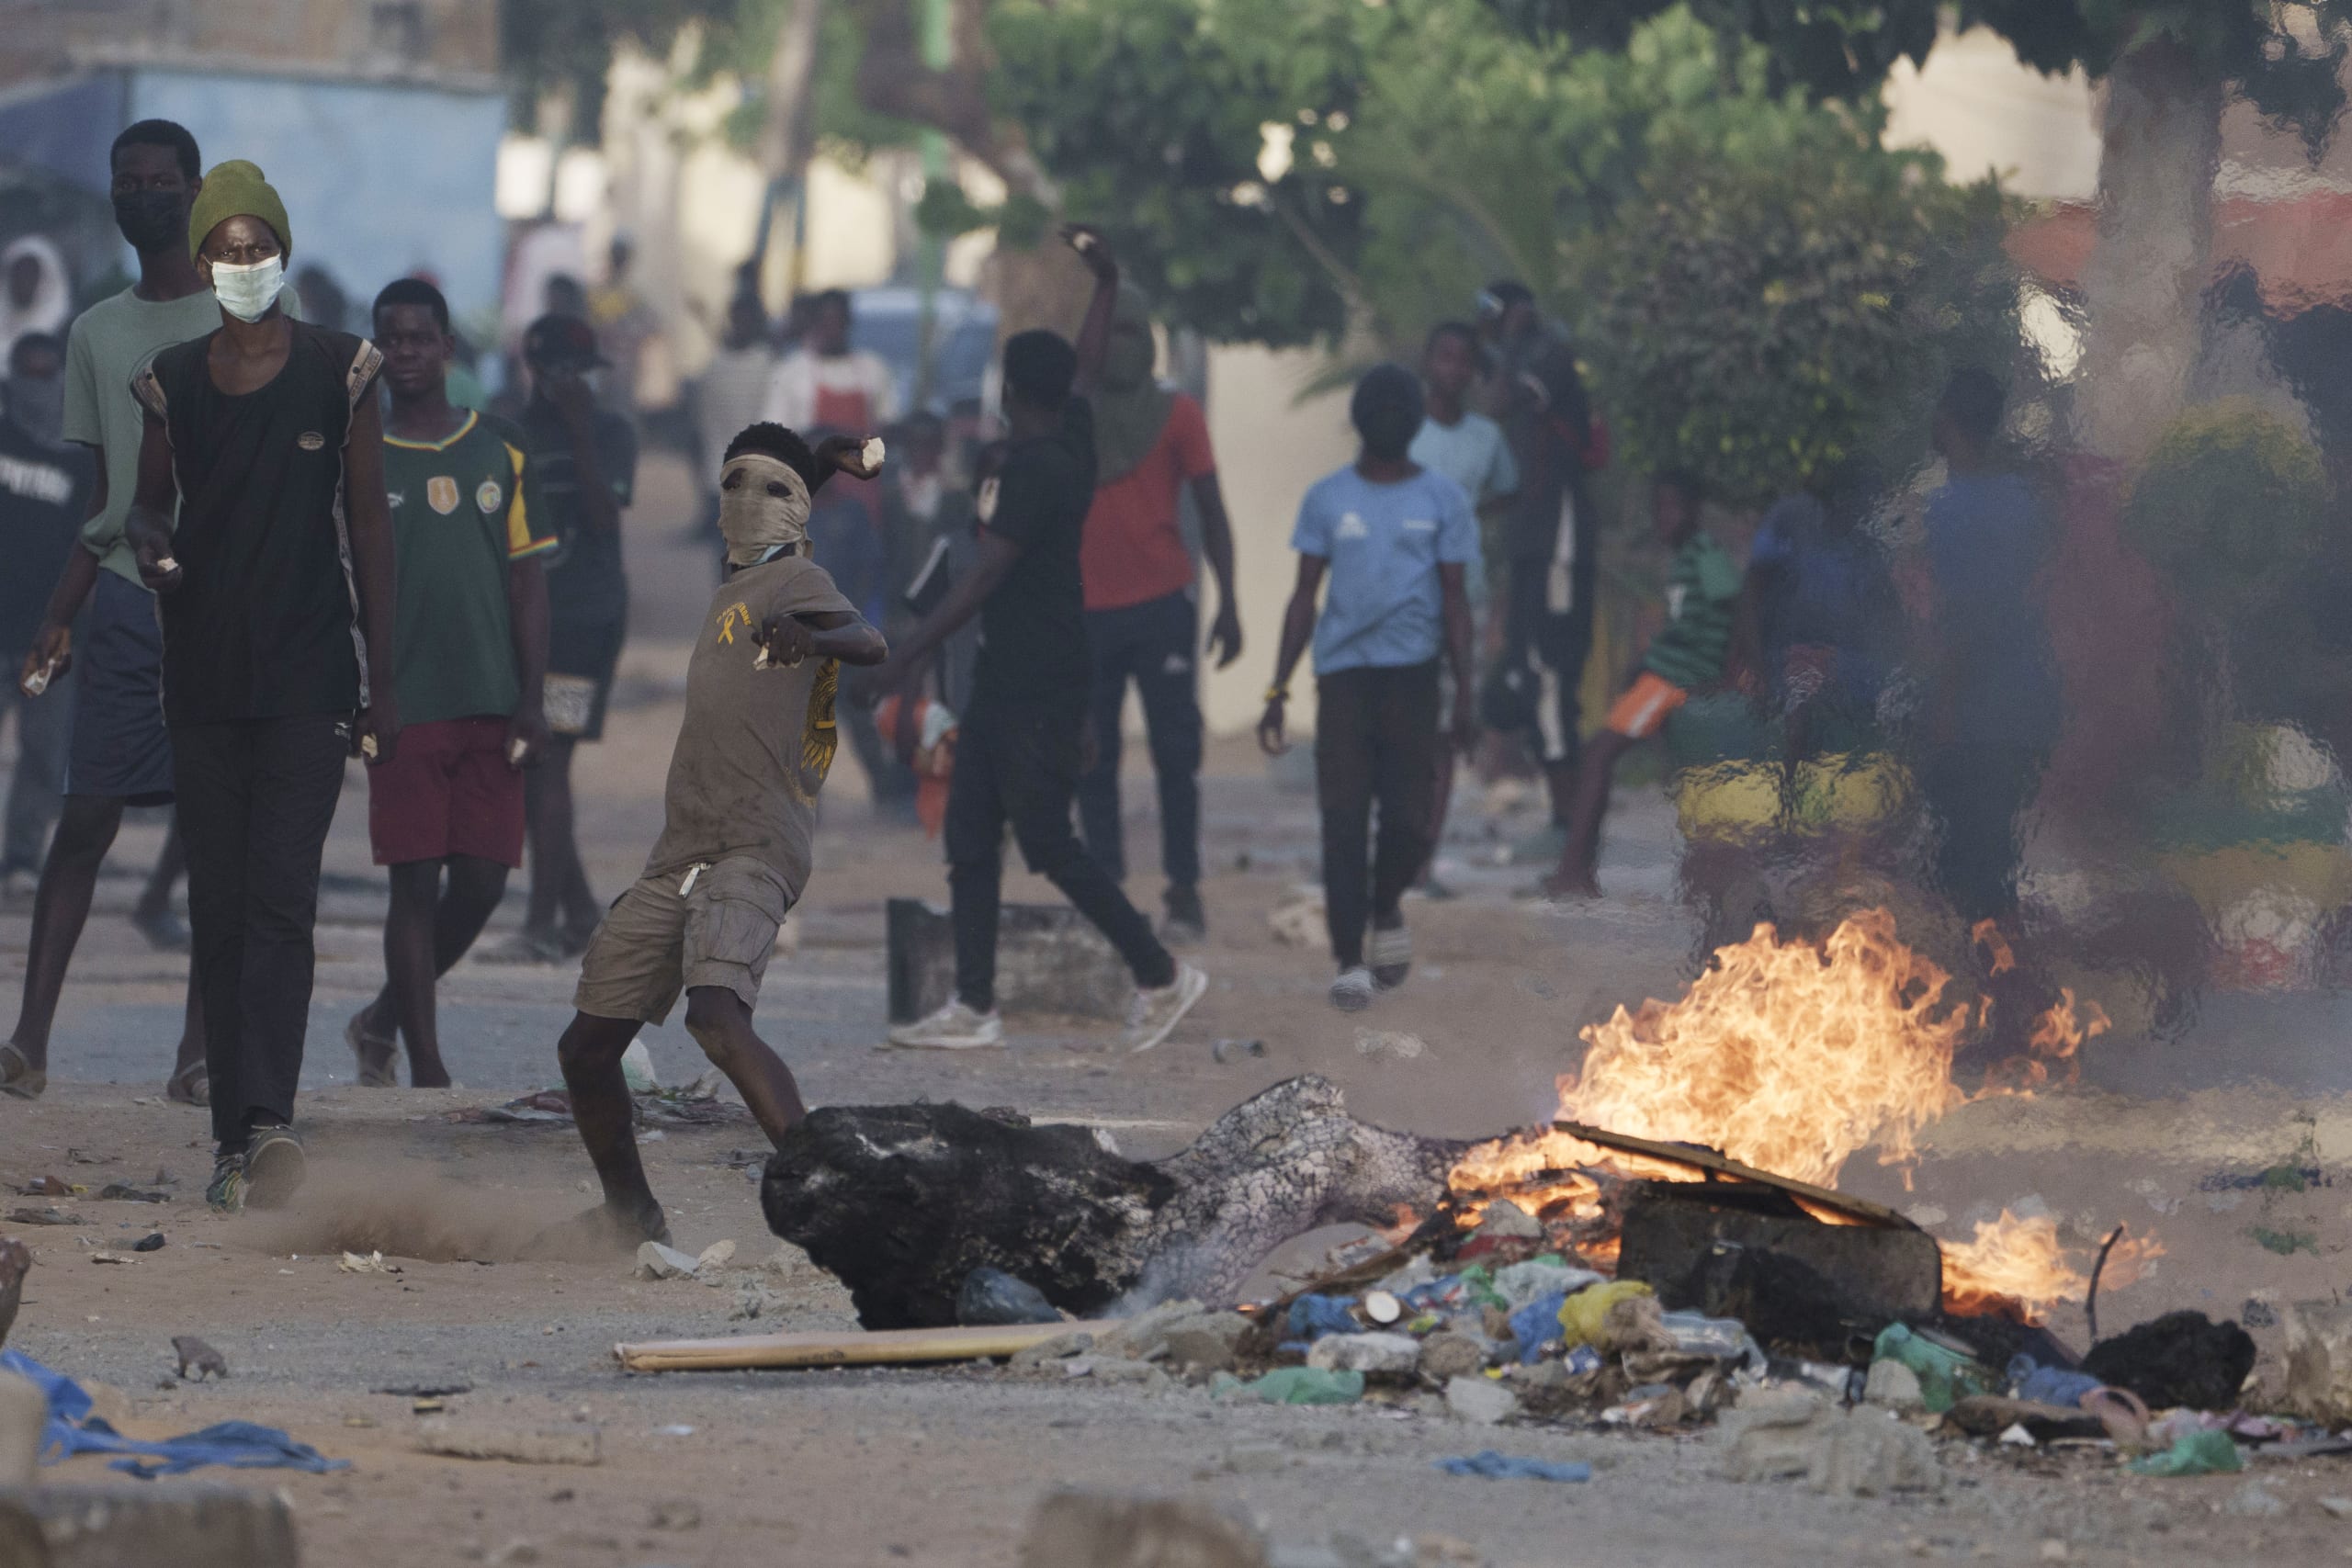 Experts warns of lasting consequences if violence in Senegal continues